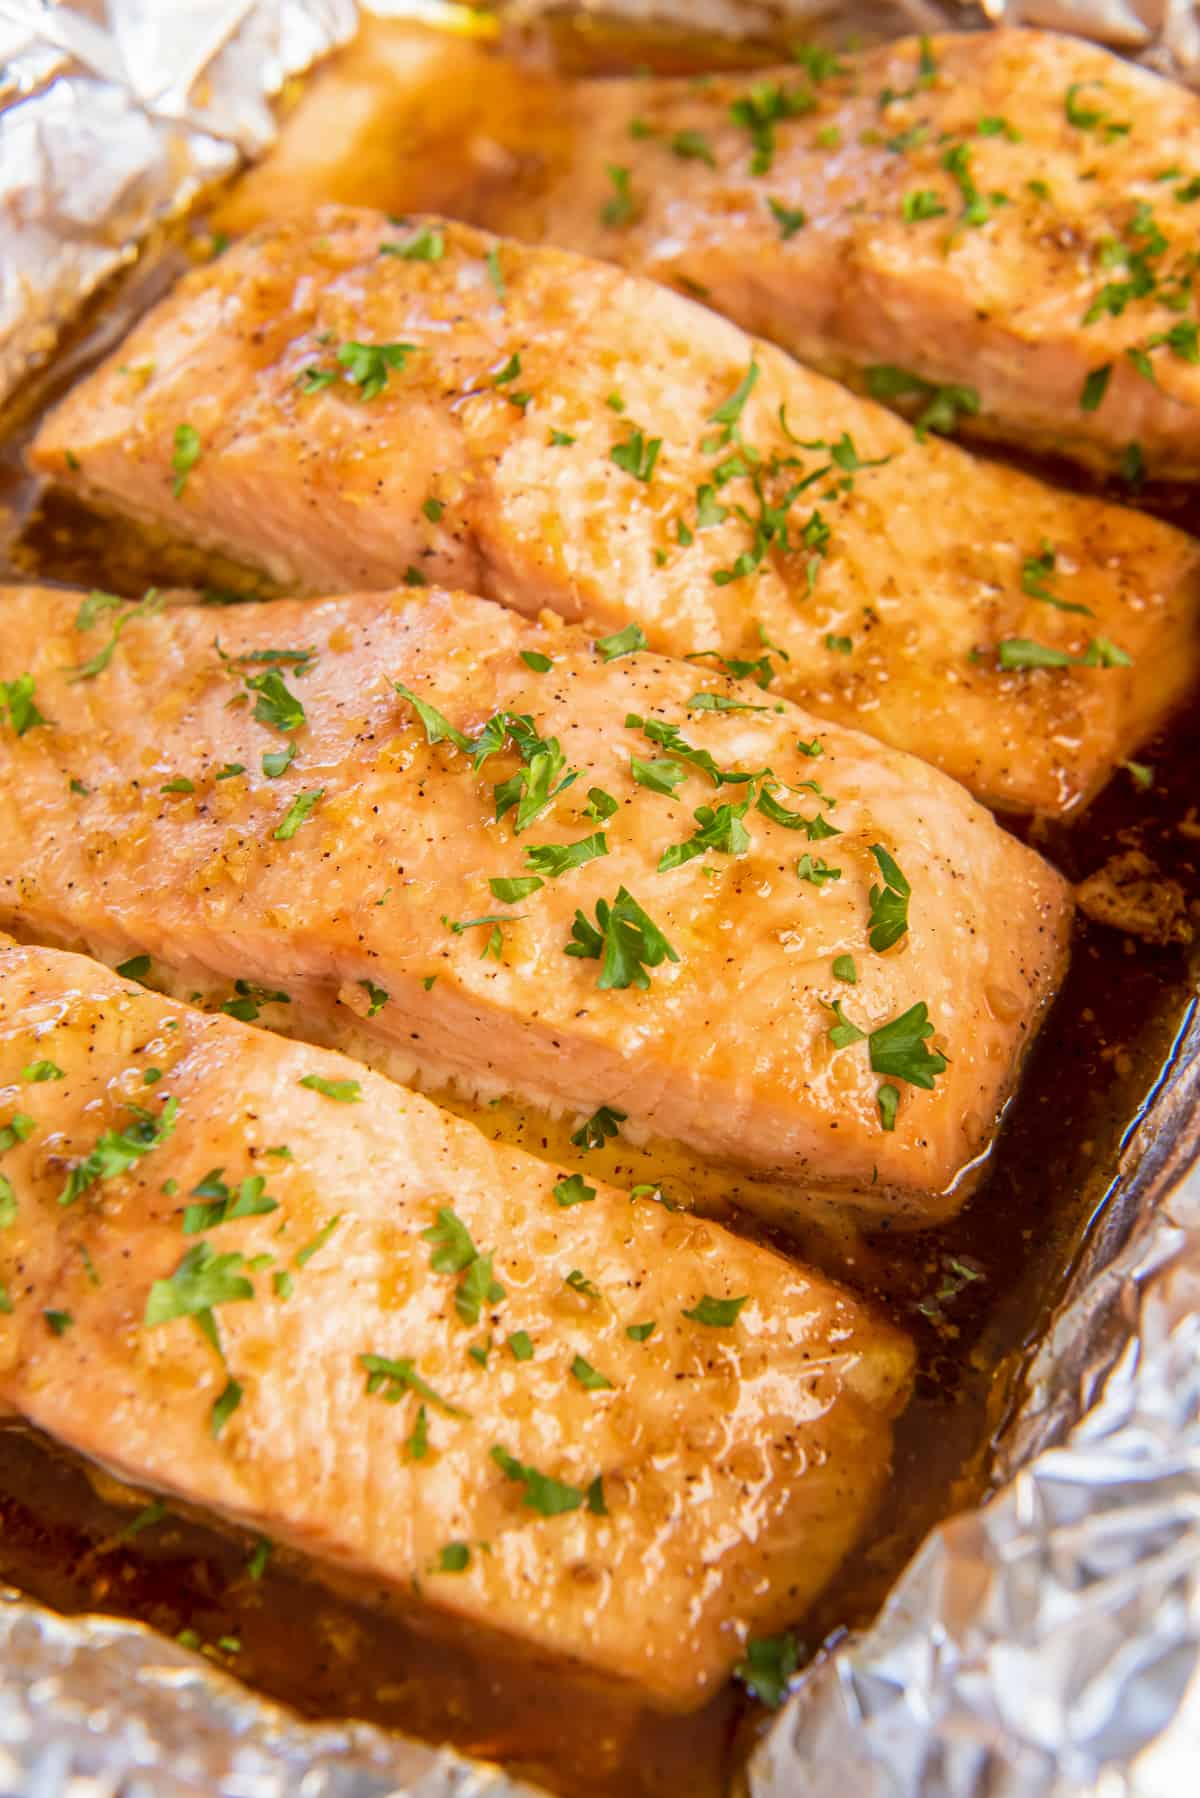 Roasted salmon topped with parsley in a foil lined baking dish.